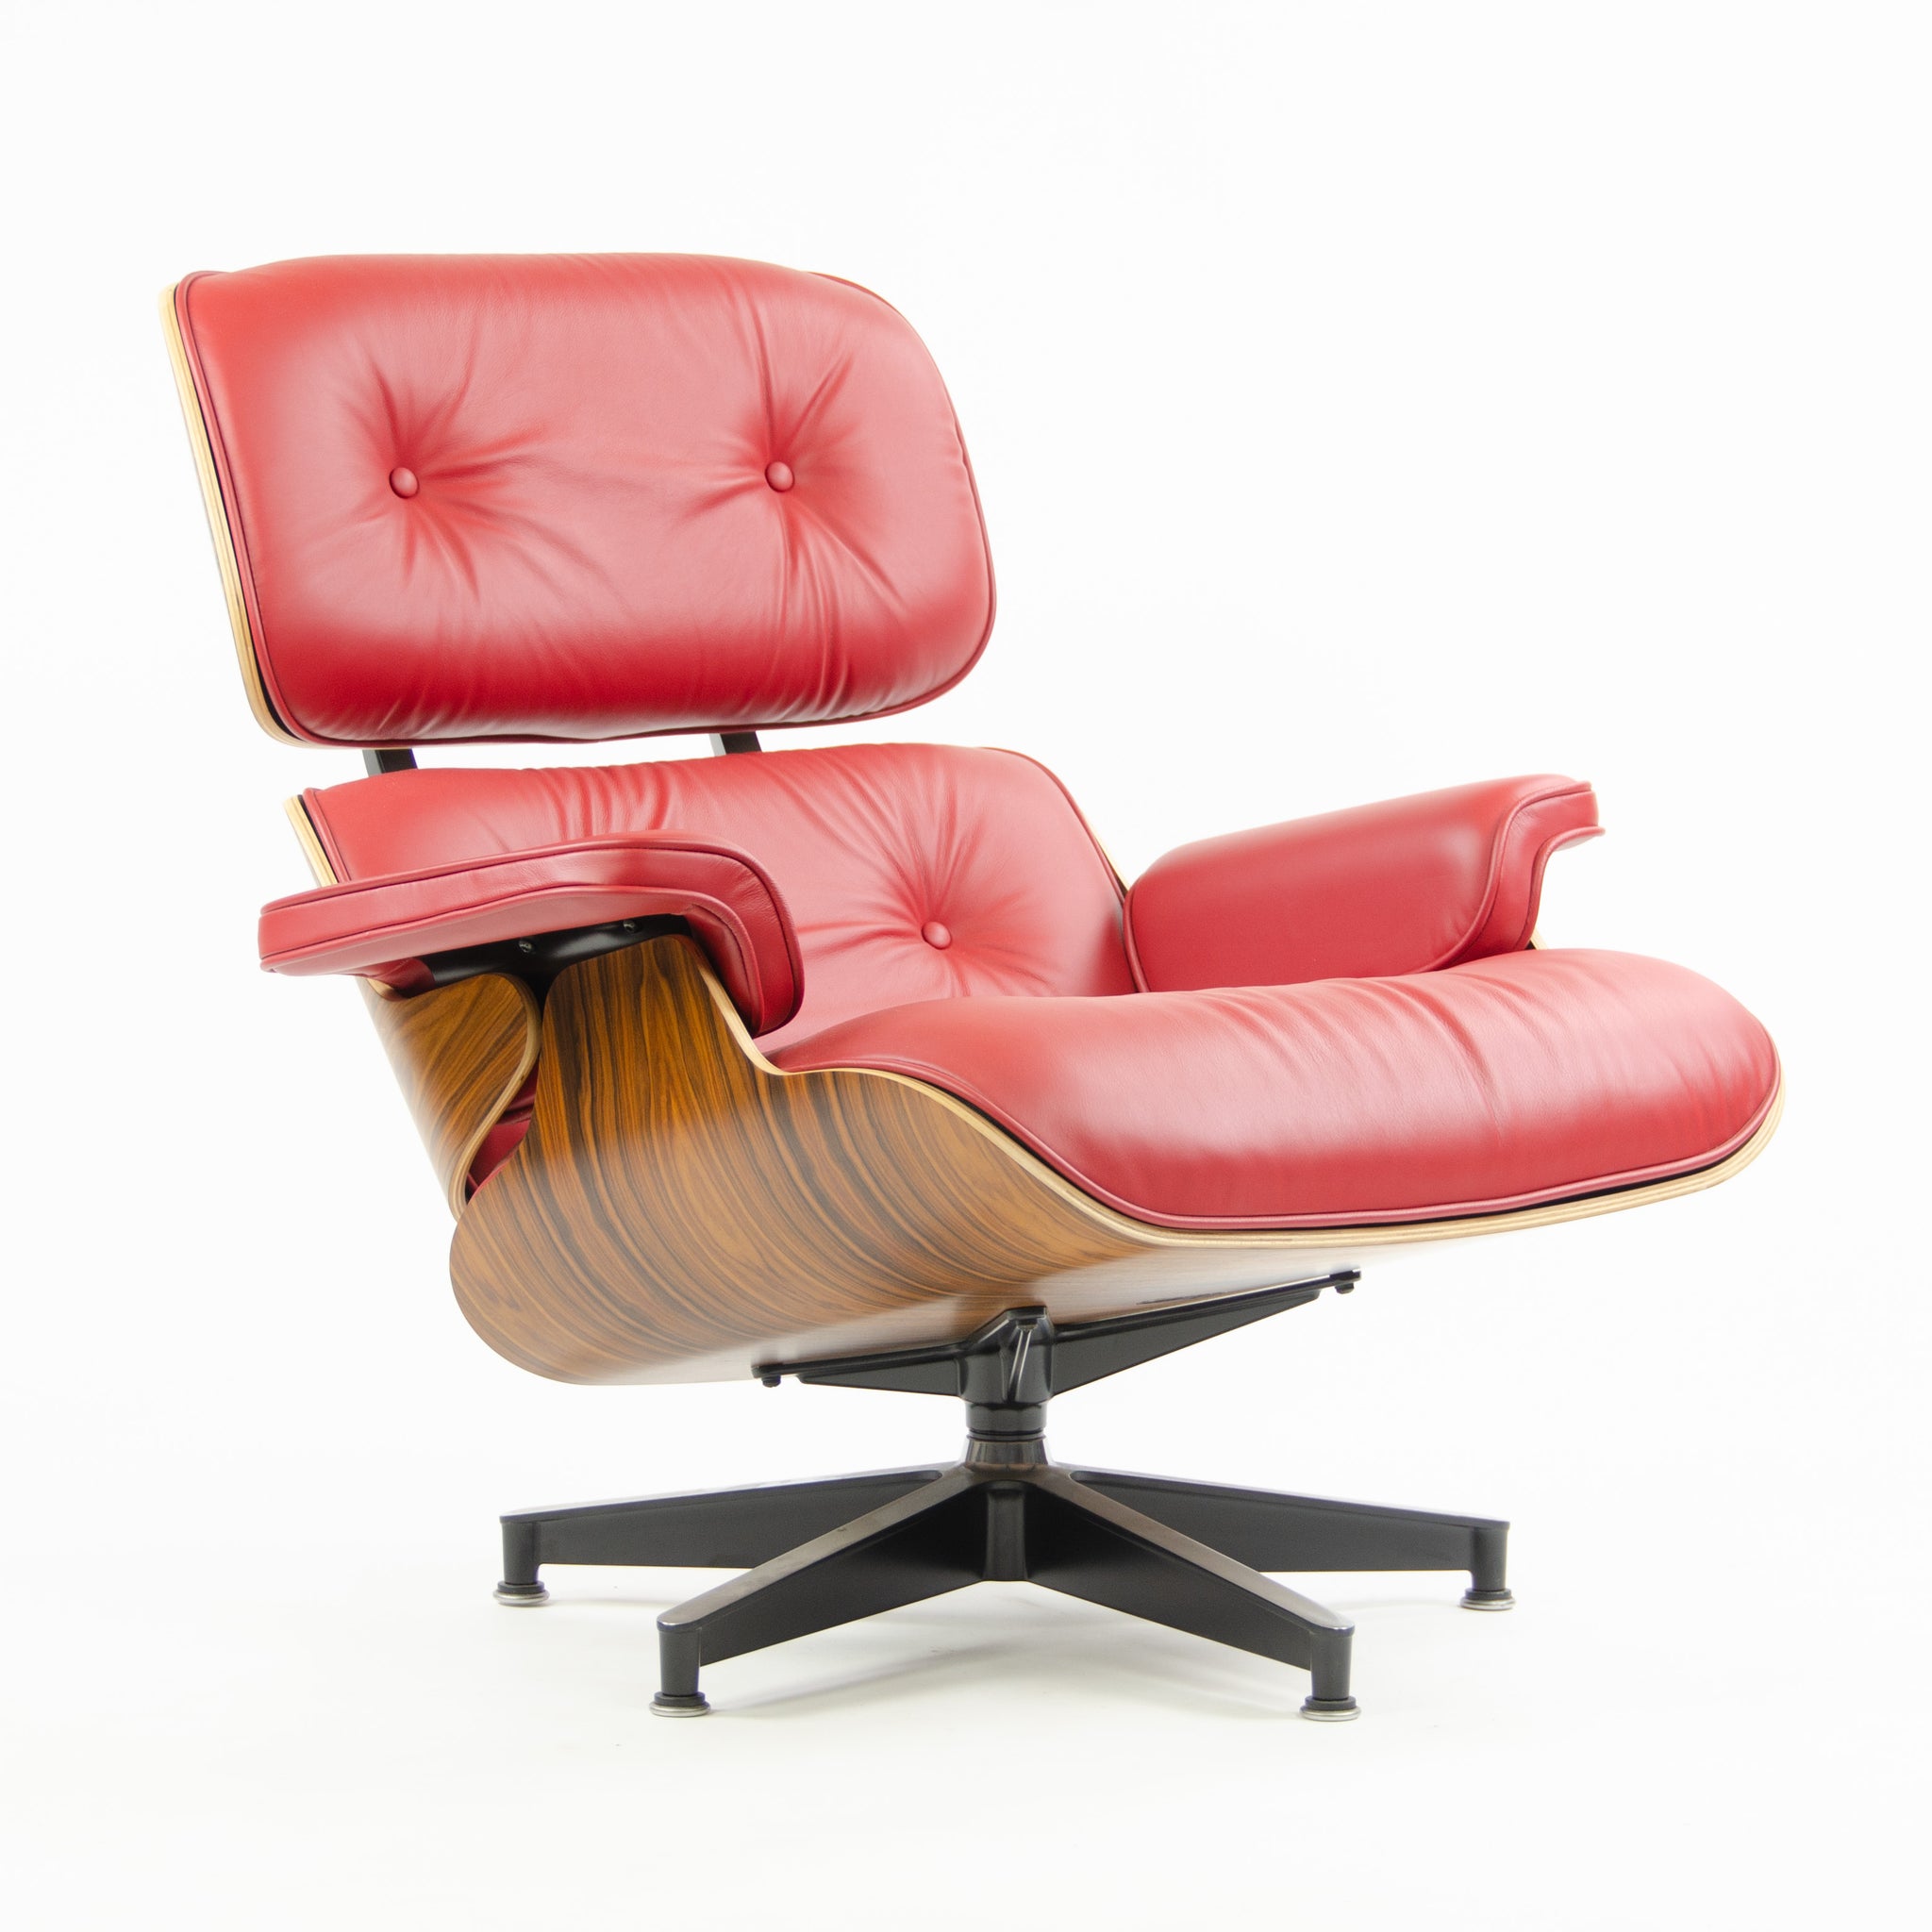 SOLD Herman Miller Eames Lounge Chair & Ottoman Palisander 670 671 Red Leather Brand New In Box